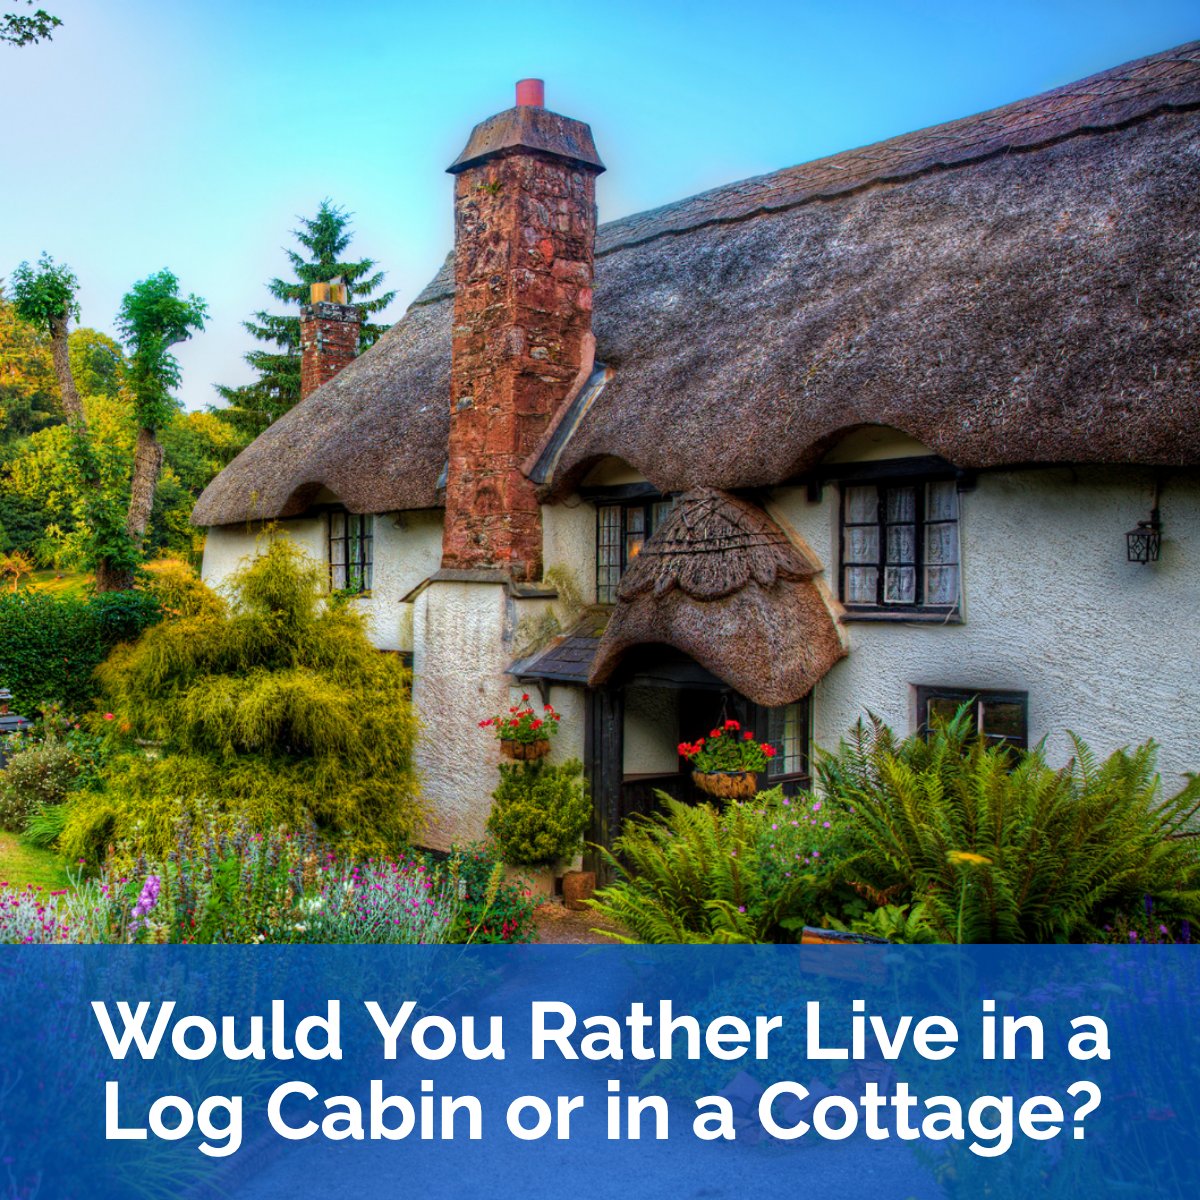 Would you rather live in a woodsy log cabin or in a cozy cottage? Cast your vote in the comments! 👇 #cottage #logcabin #question #cozy